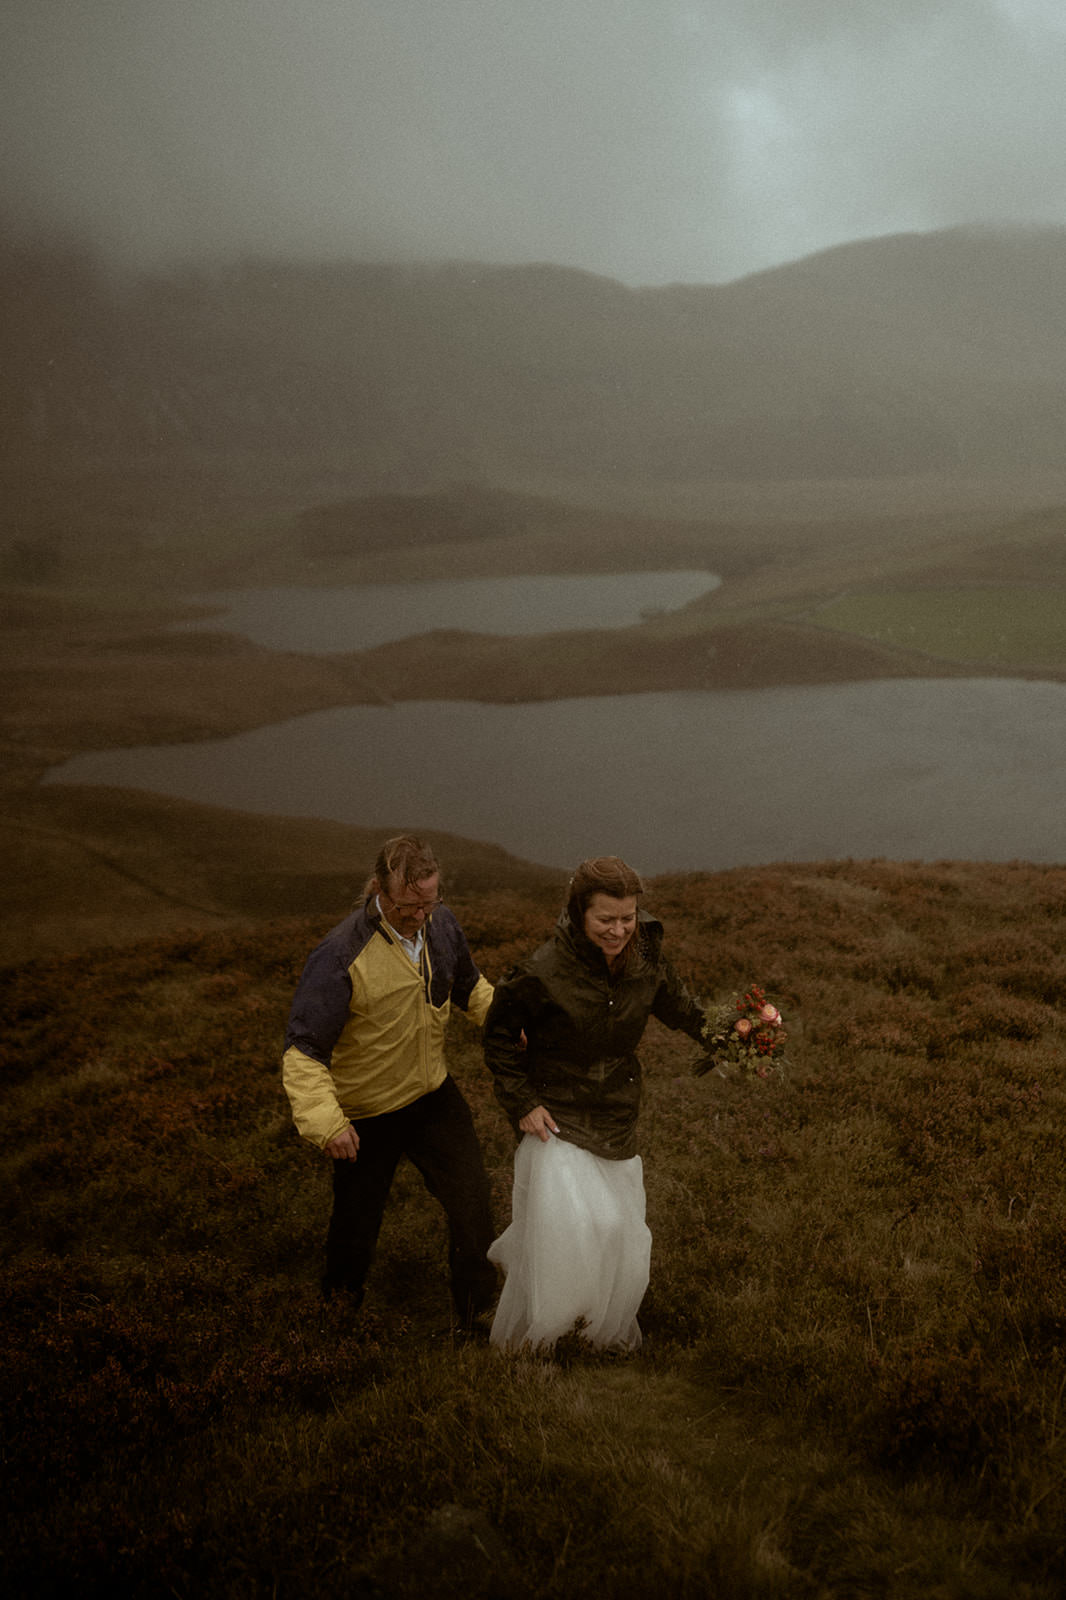 Snowdonia Elopement Photography | Elopement Planning & Photography in Wales